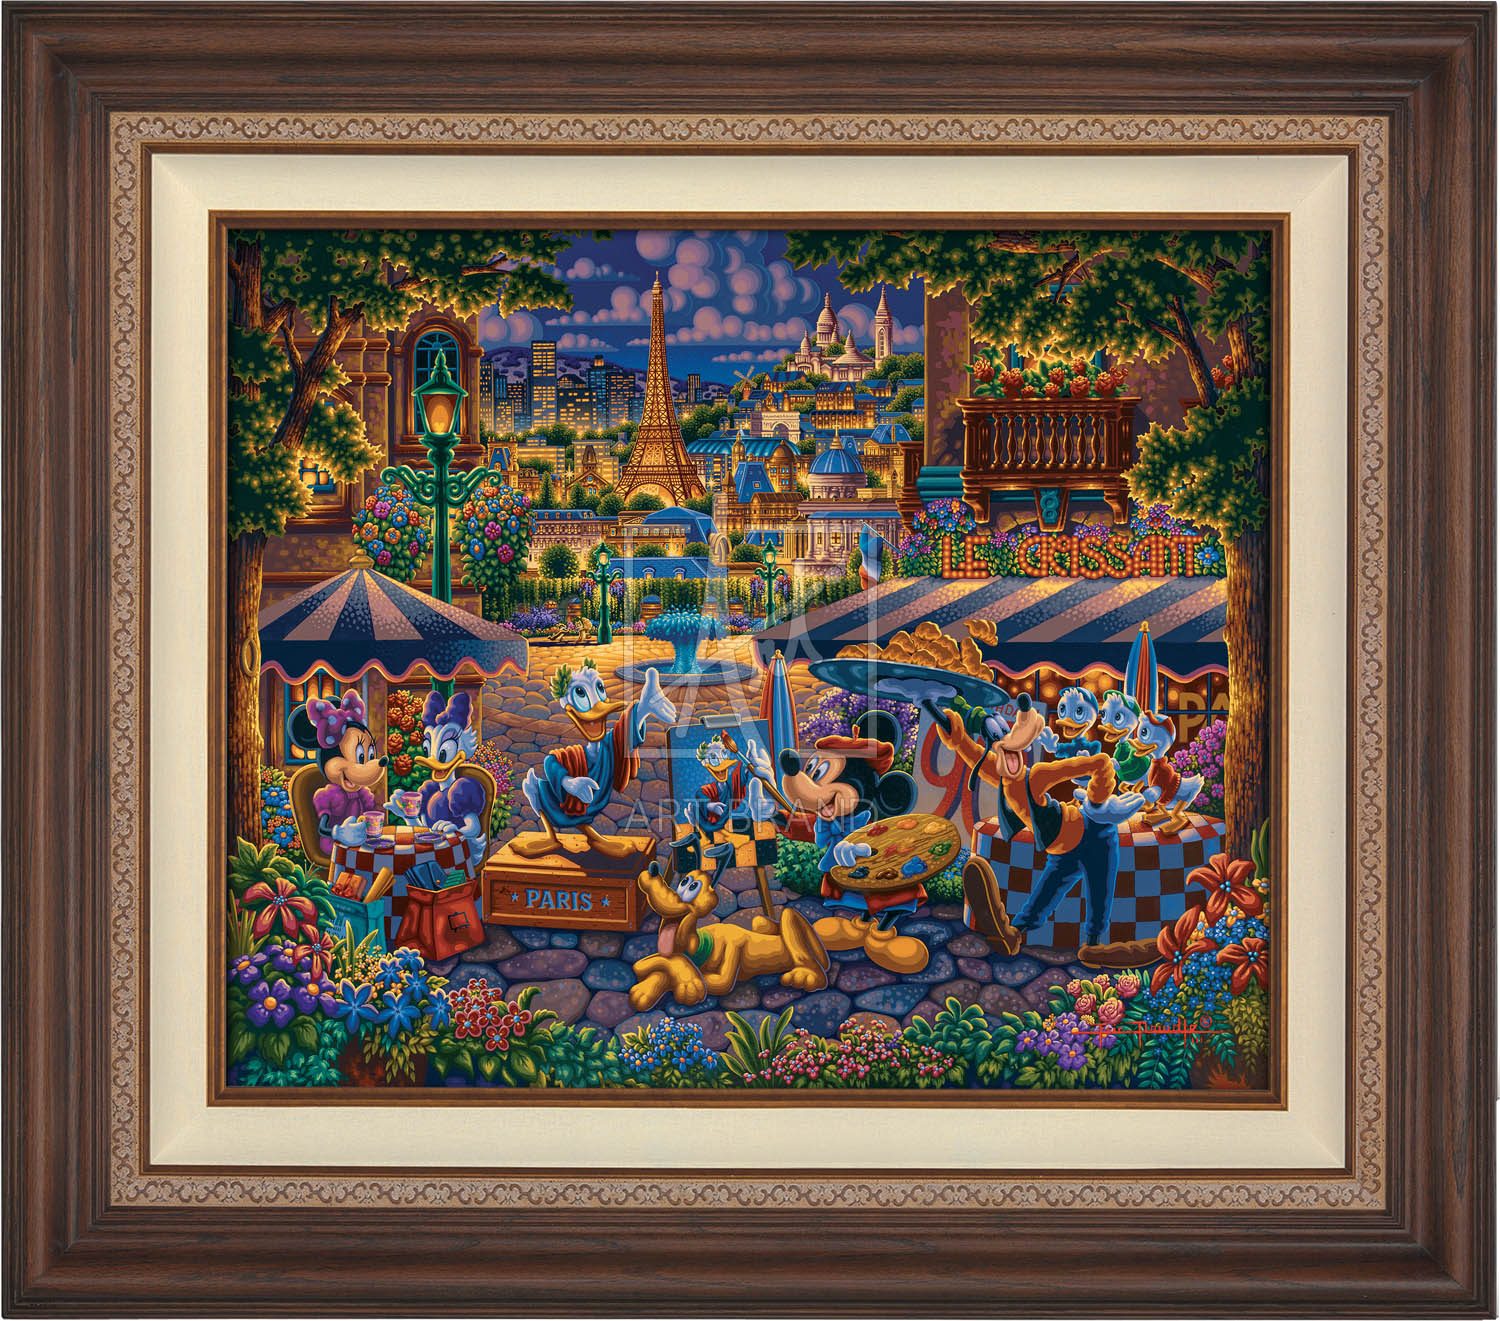 Mickey Mouse and Donald Duck playing the part of both artist and model, as they enjoy the company of friends, in the courtyard plaza in Paris - Dark Walnutd Frame